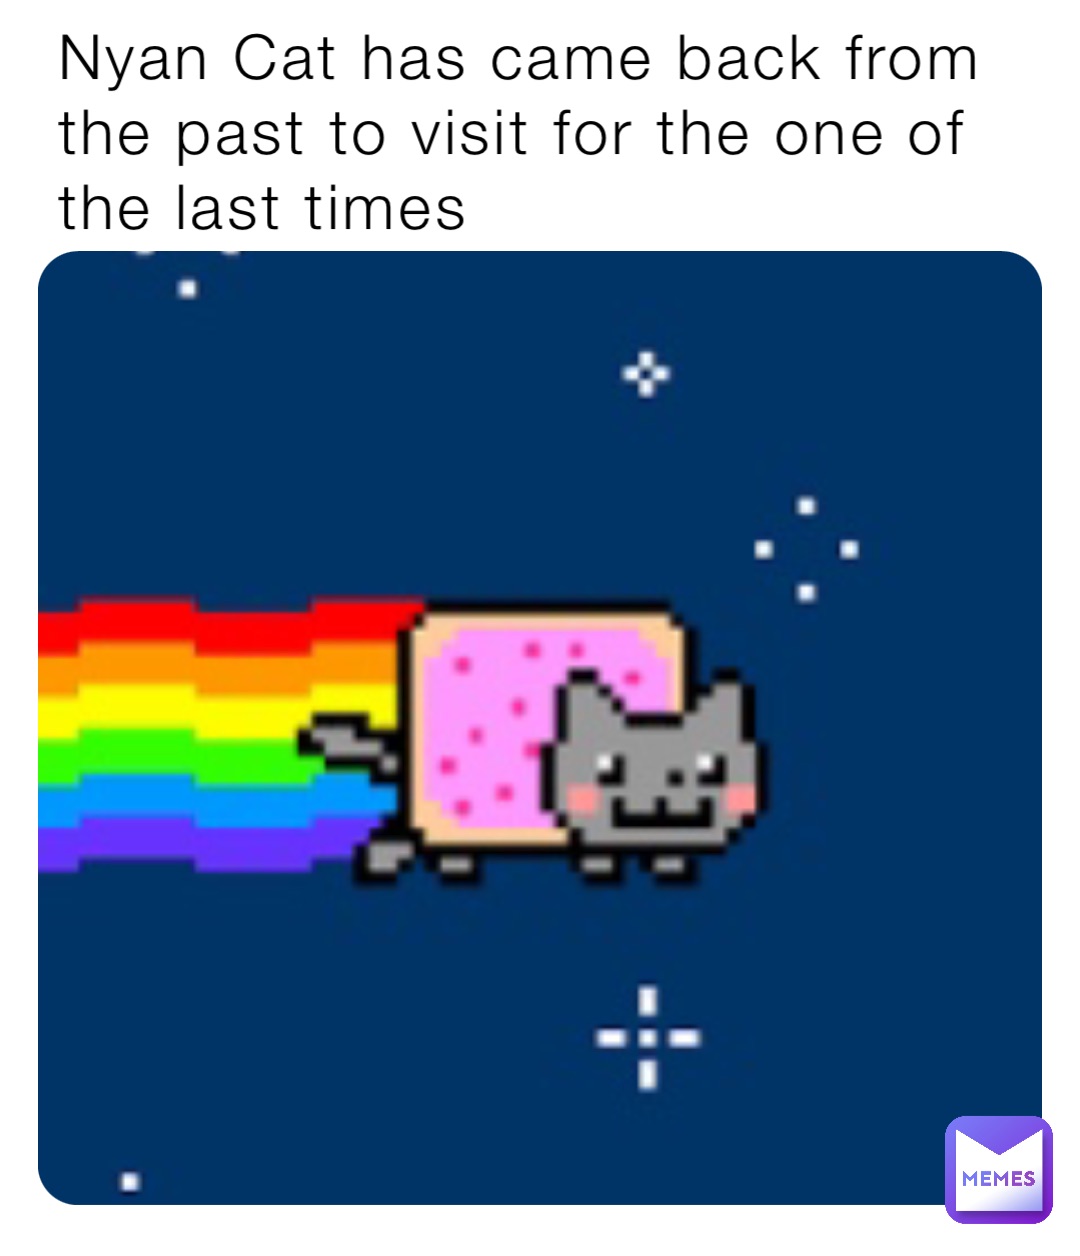 Nyan Cat has came back from the past to visit for the one of the last times